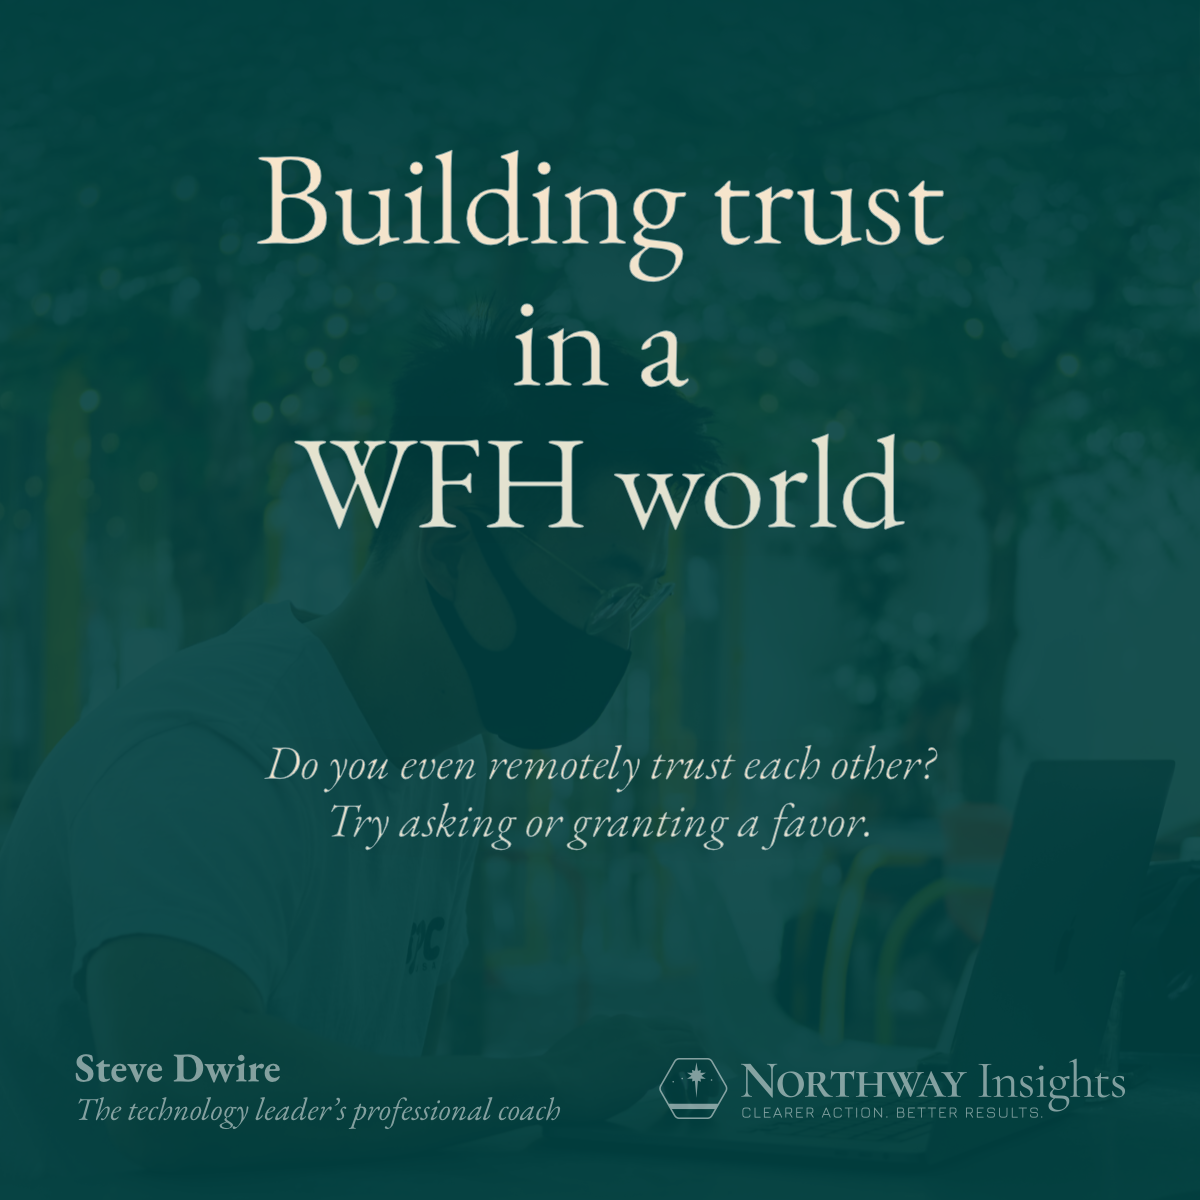 Building trust in a WFH world